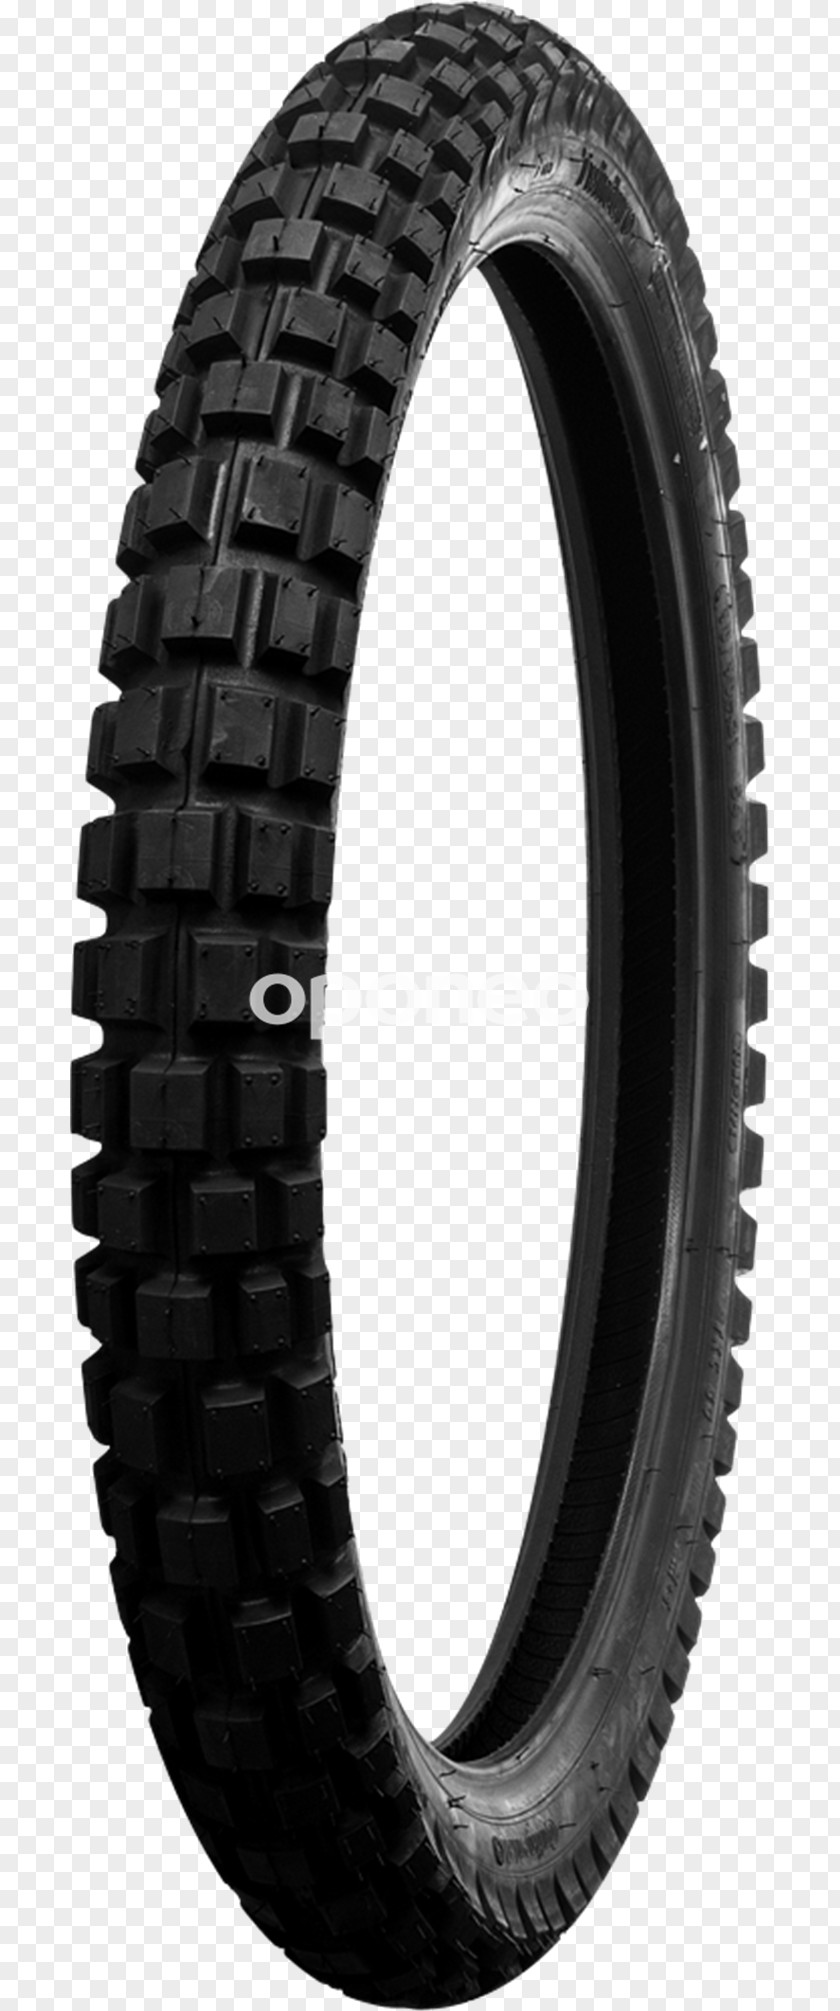 Motorcycle Continental AG Off-road Tire Kenda Rubber Industrial Company PNG